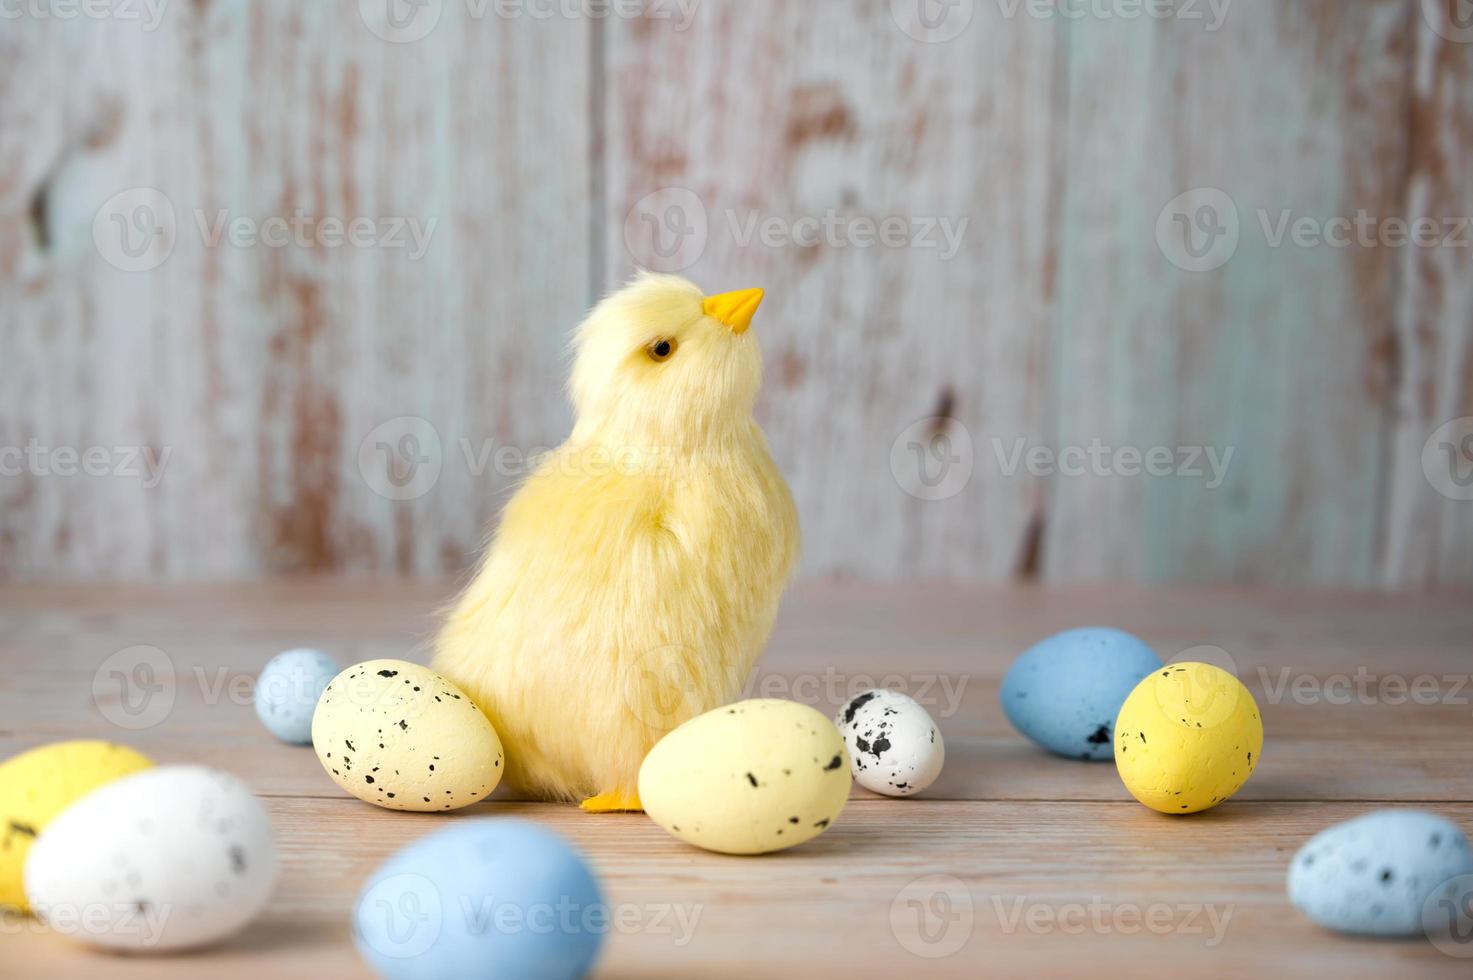 Easter greeting card with yellow chicken near the nest full of eggs.Colorful banner in white,yellow and white photo